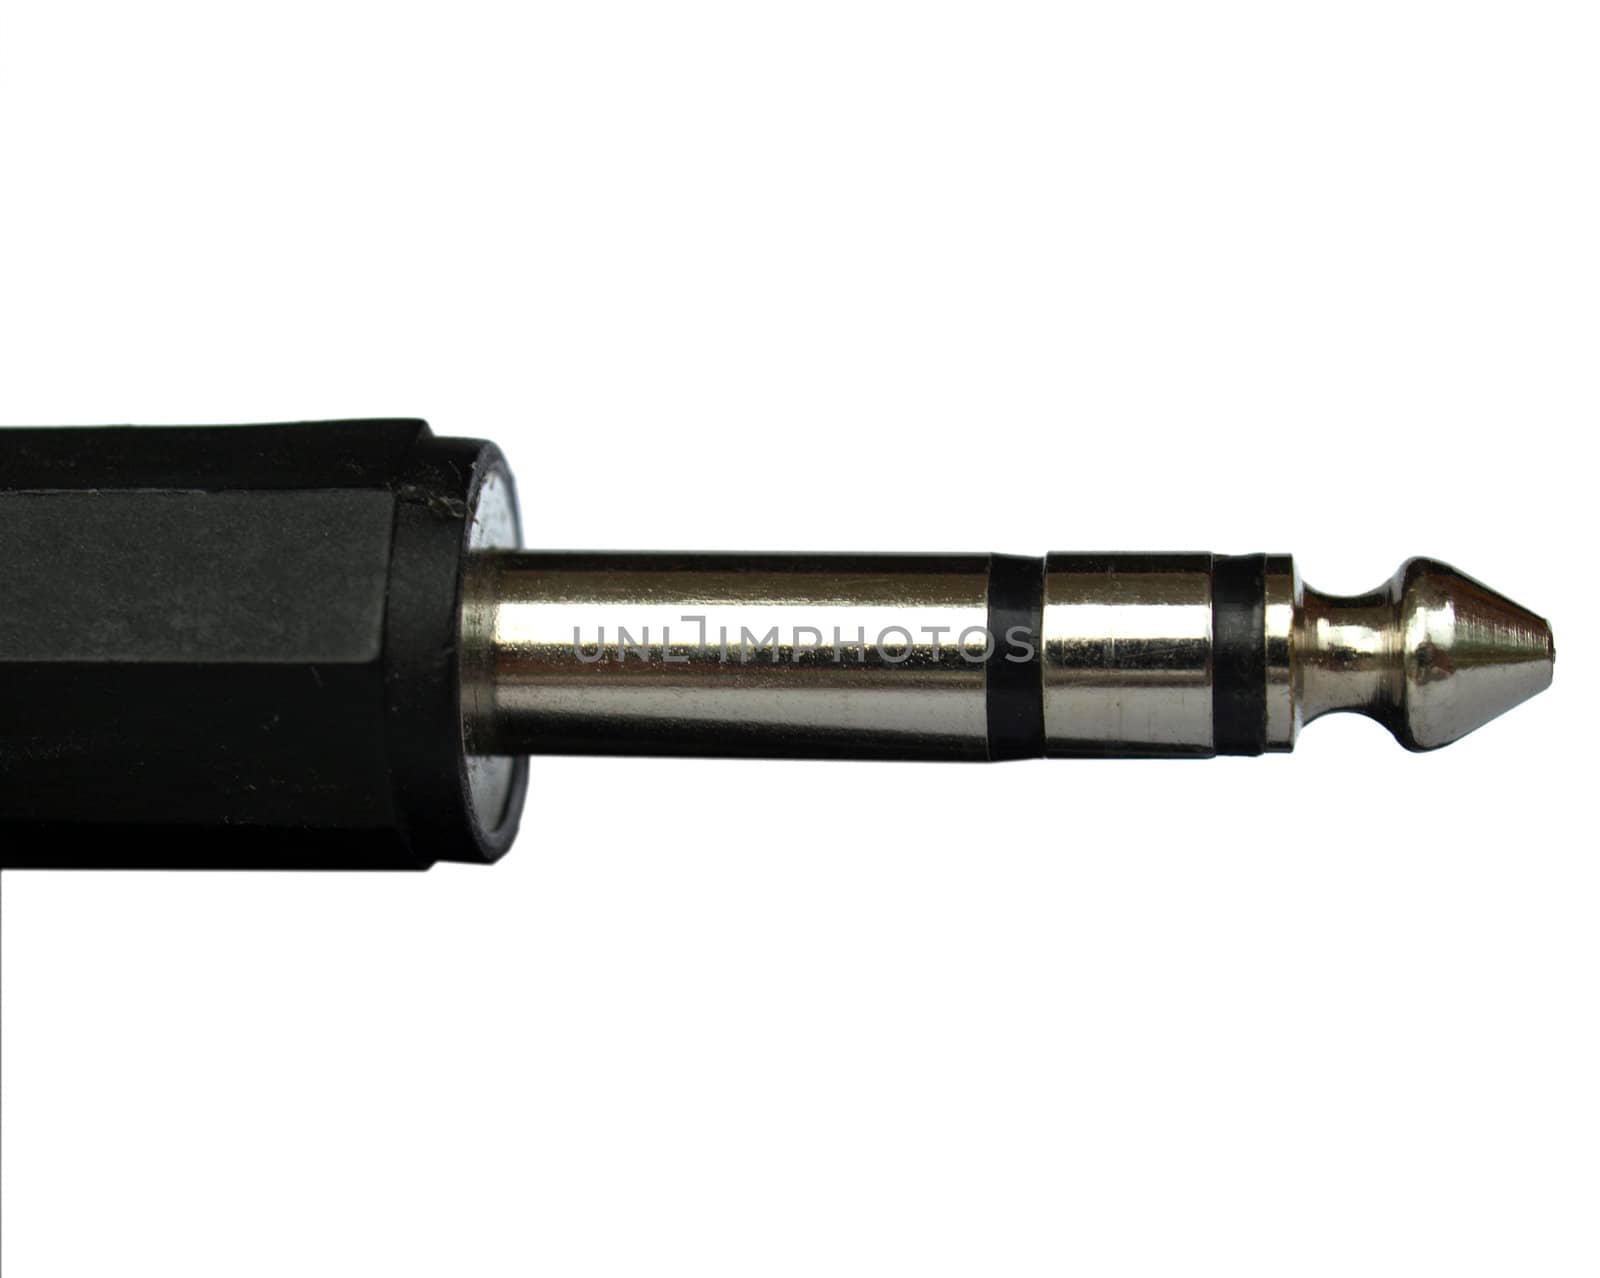 Stereo audio jack plug for cables used in music recording studio and live music event